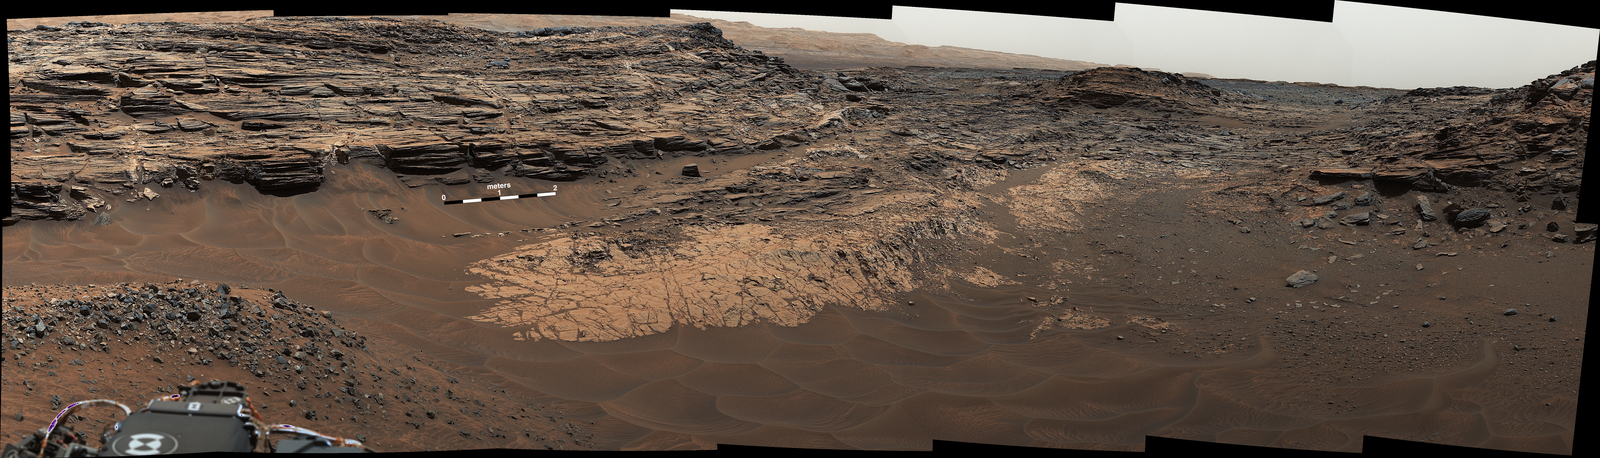 This May 22, 2015, view from the Mast Camera (Mastcam) in NASA's Curiosity Mars rover shows the "Marias Pass" area where a lower and older geological unit of mudstone -- the pale zone in the center of the image -- lies in contact with an overlying geological unit of sandstone.